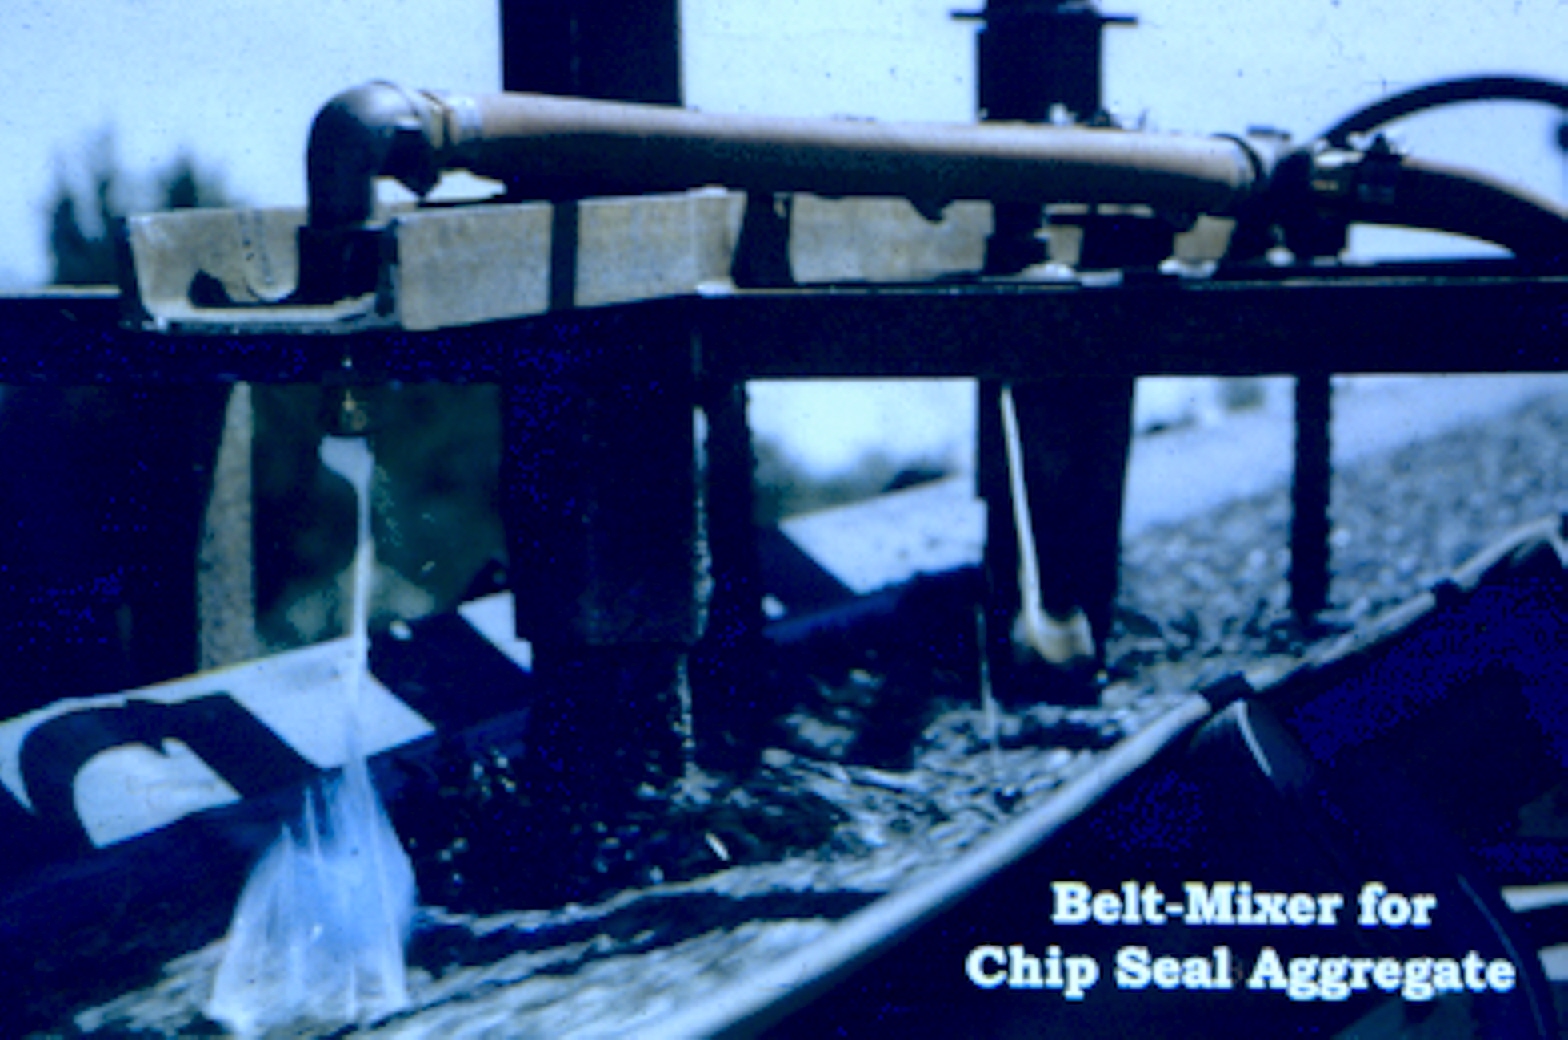 Belt Mixer for Chip Seal